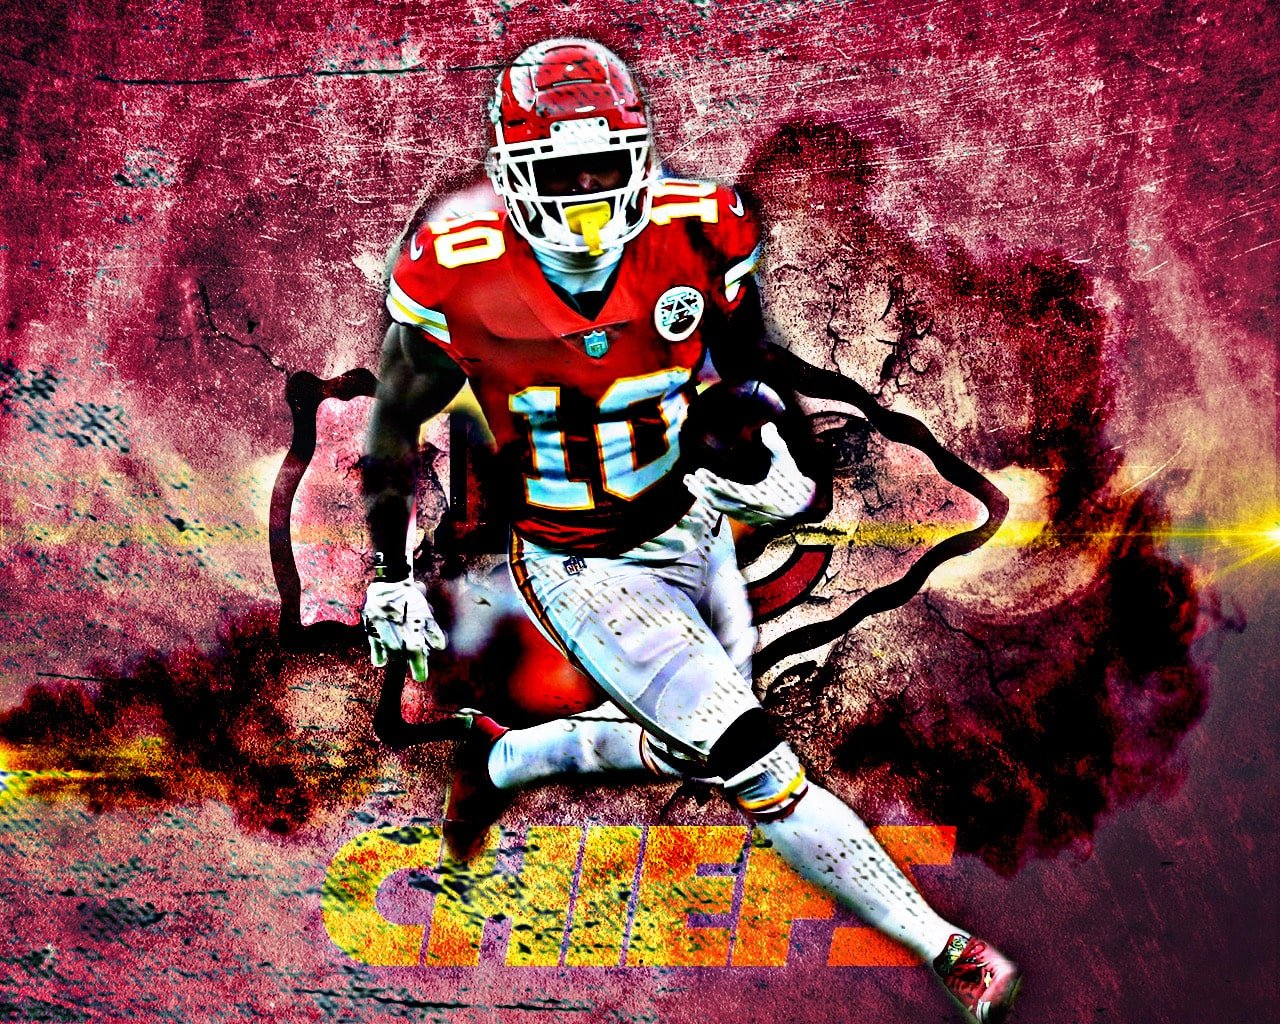 Aggregate more than 73 edit tyreek hill wallpaper - in.cdgdbentre